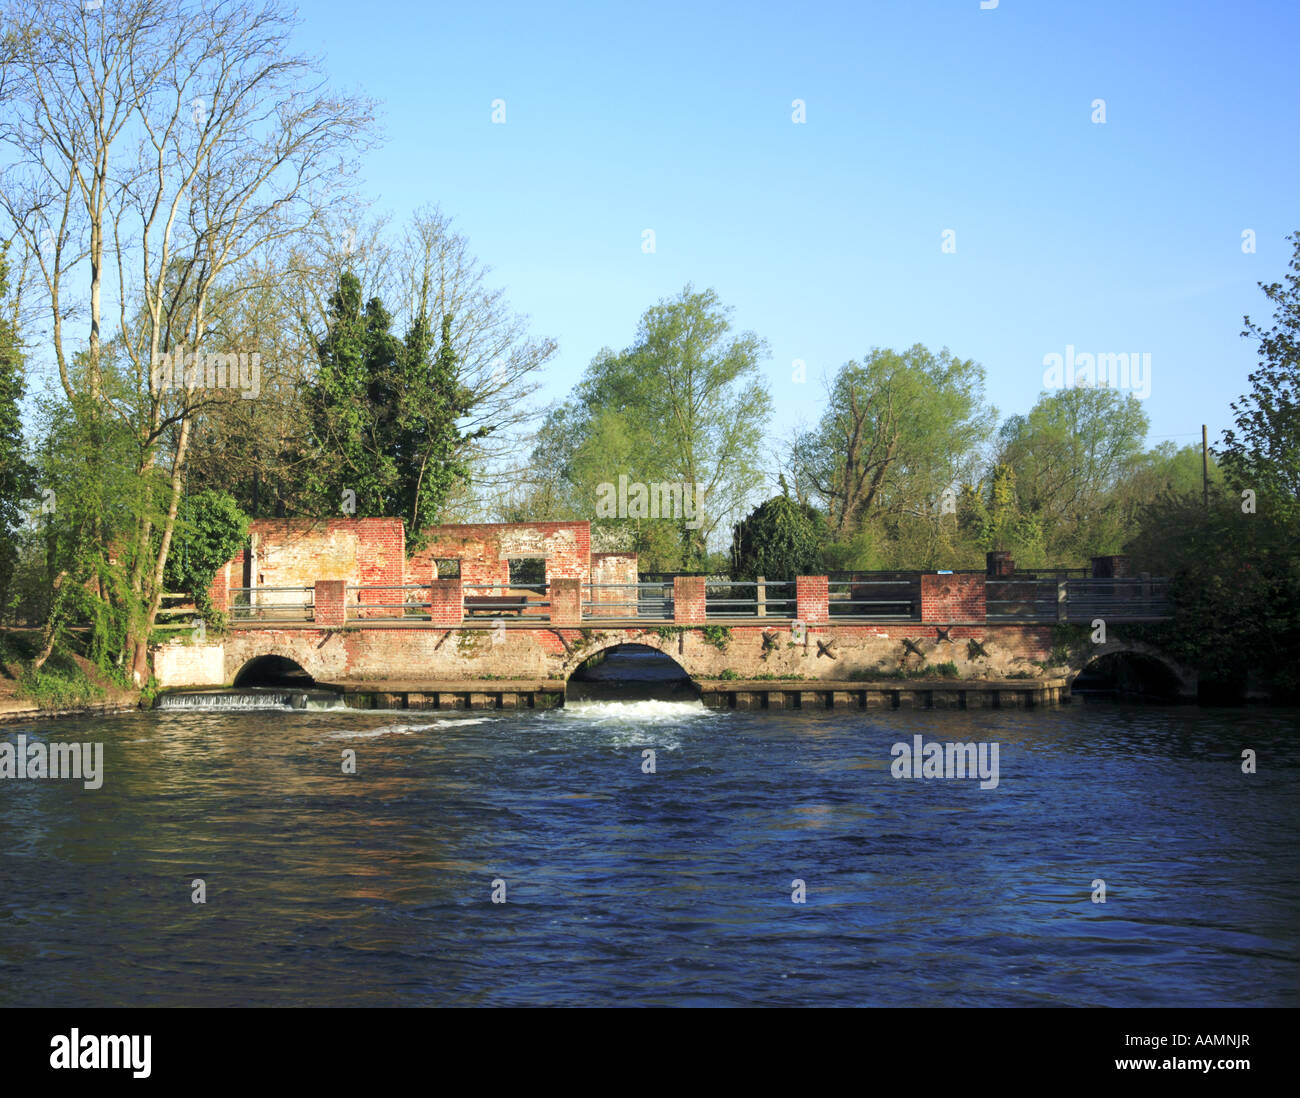 A view of the Mill Pool and River Bure at the former watermill at Horstead, Norfolk, England, United Kingdom, Europe. Stock Photo